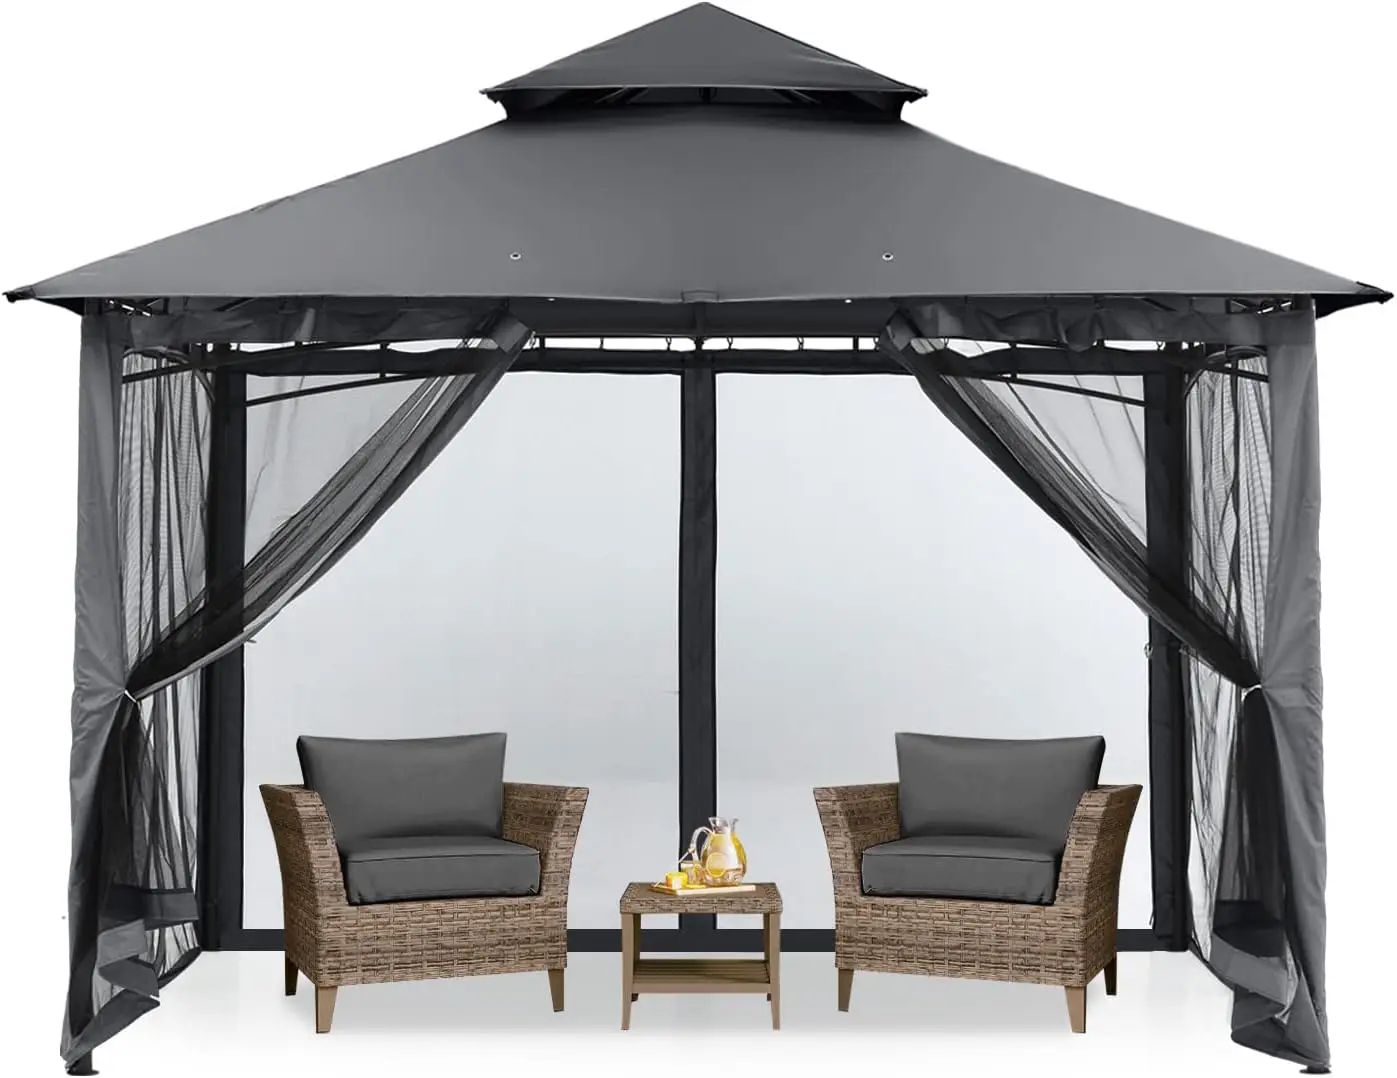 

MASTERCANOPY Outdoor Garden Gazebo for Patios with Stable Steel Frame and Netting Walls (8x8,Dark Gray)